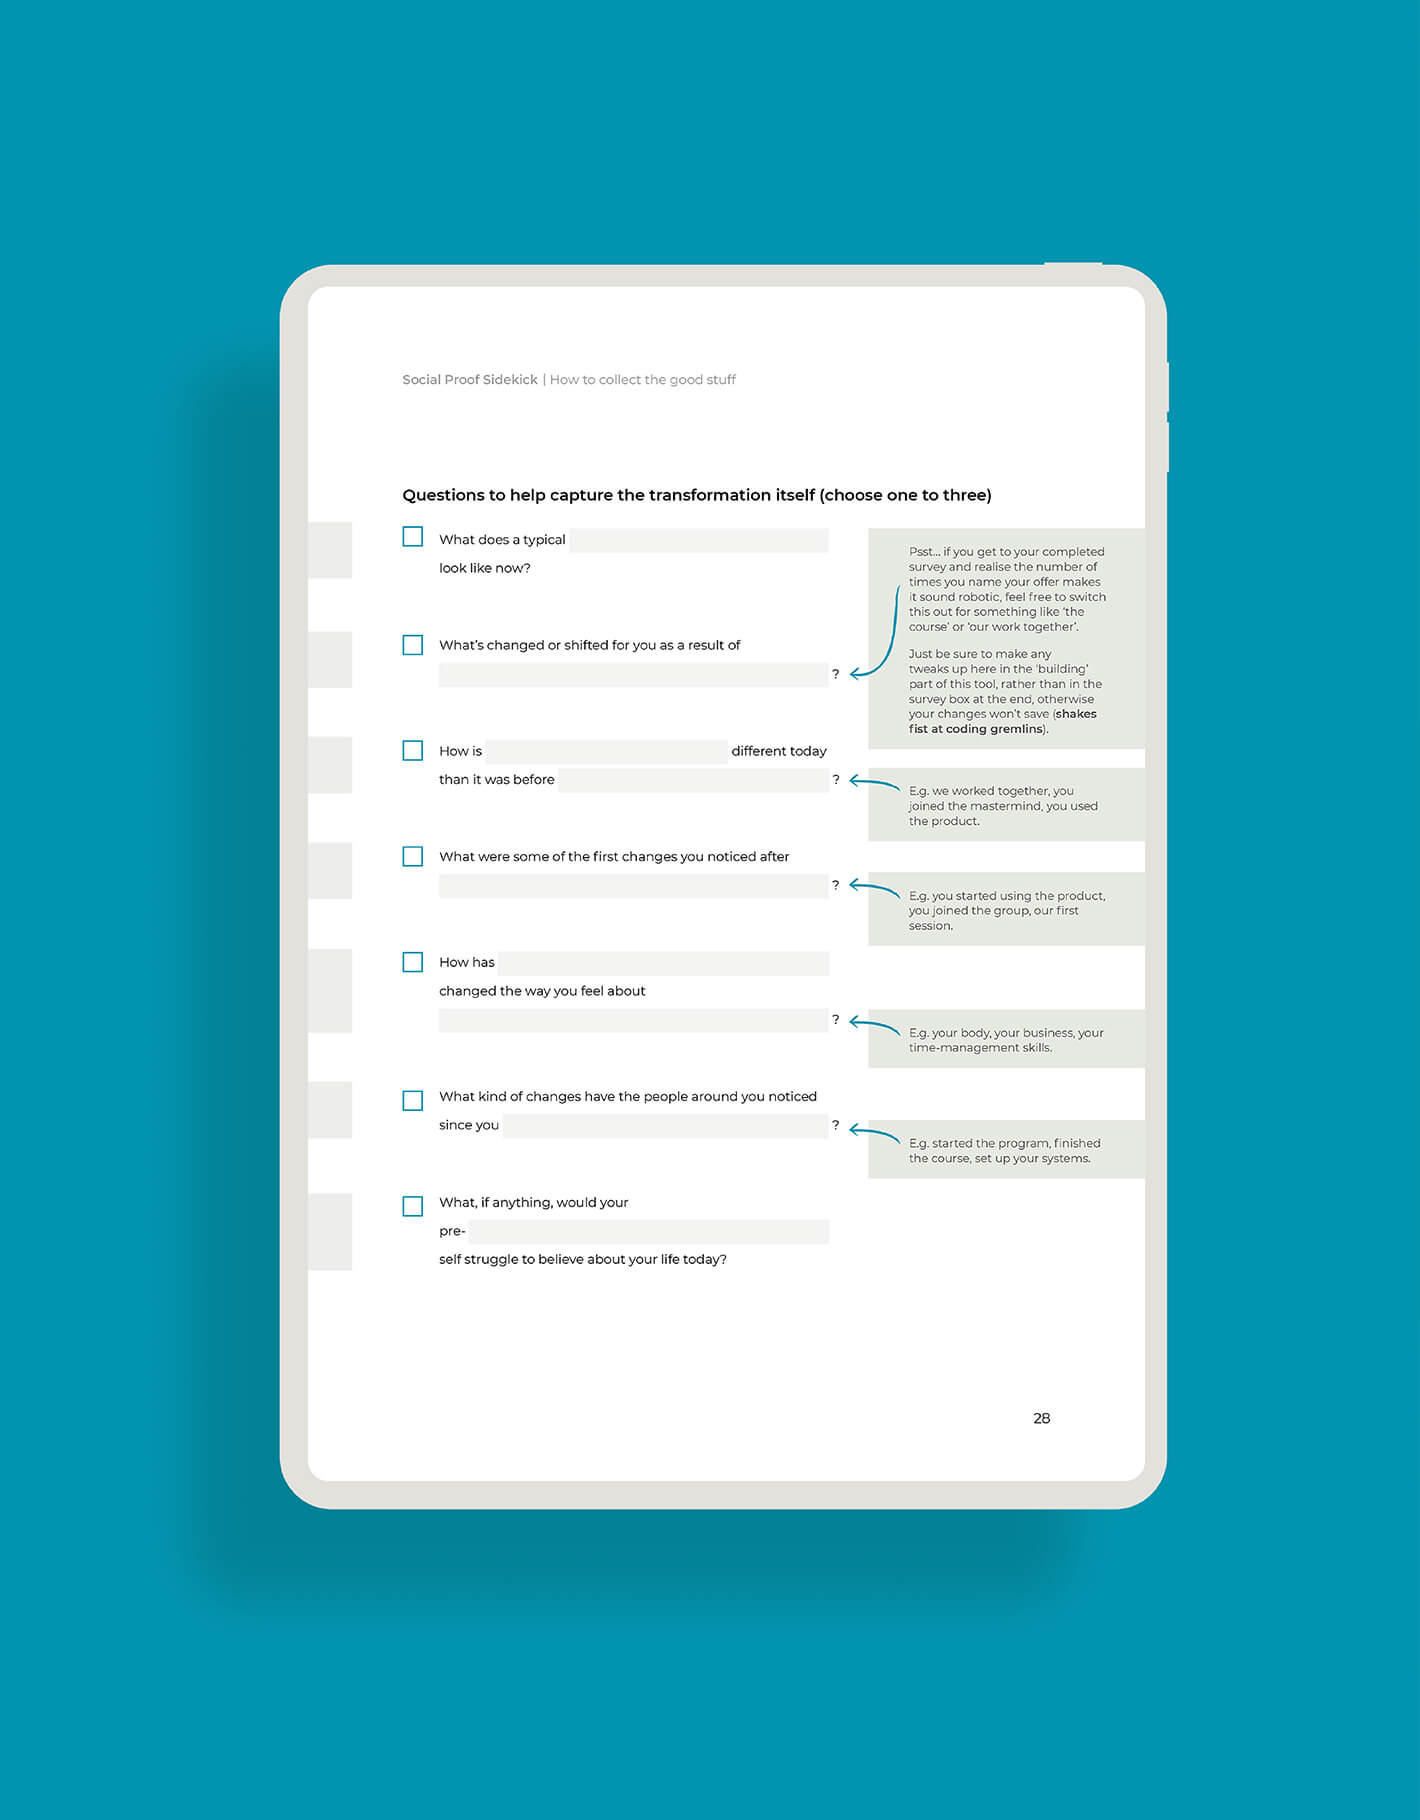 Brand designer portfolio image for the Social Proof sidekick shows an ipad on a blue background. A page of the form builder shows interactive PDF fields and annotations.